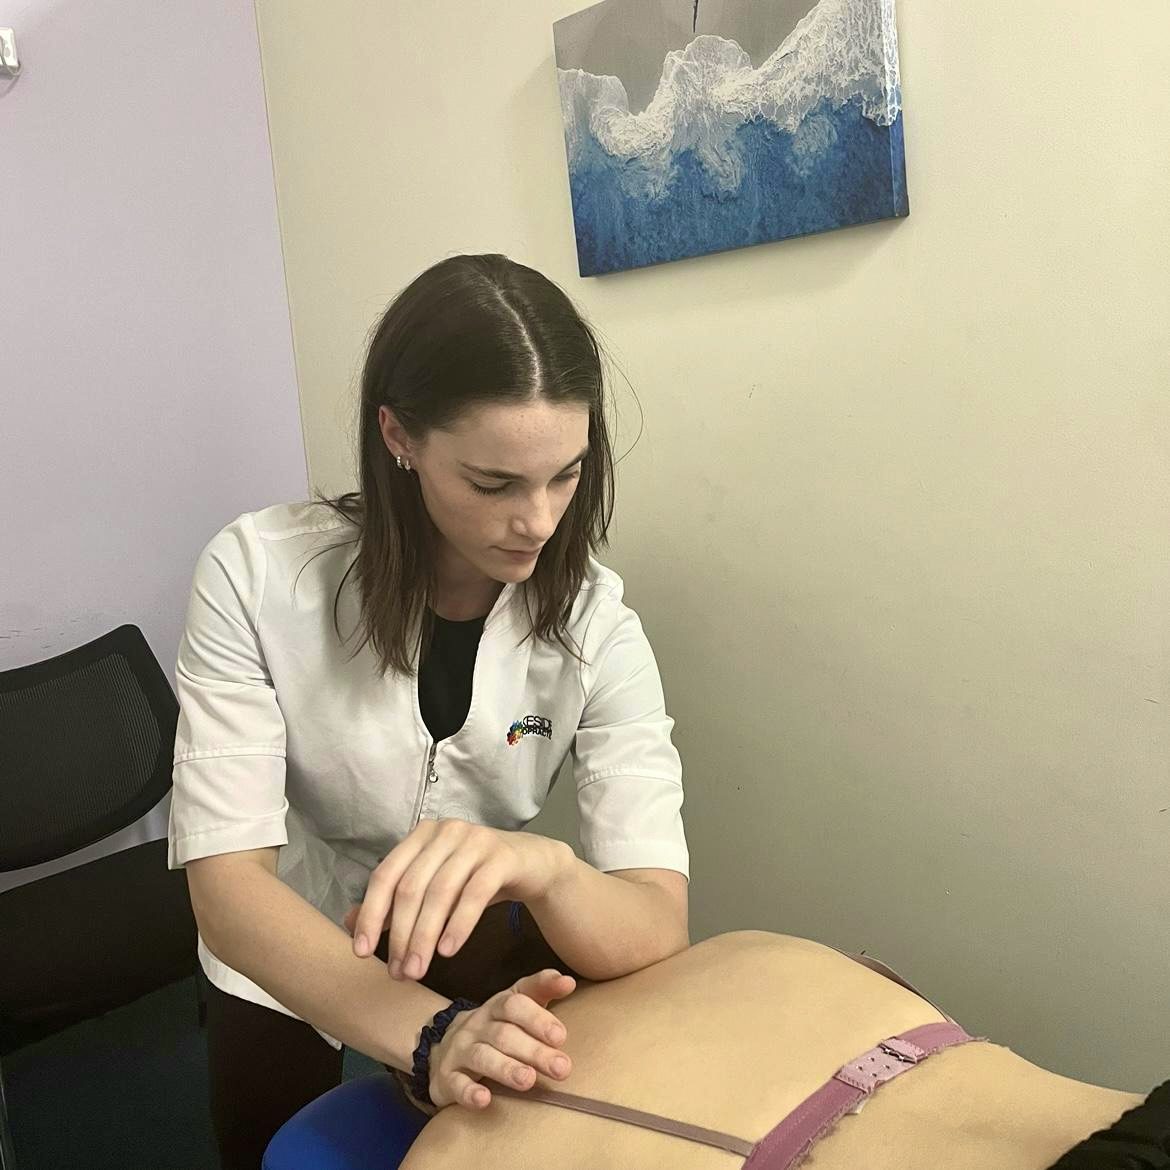 Natalie uses her elbow during massage therapy at Lakeside Chiropractic